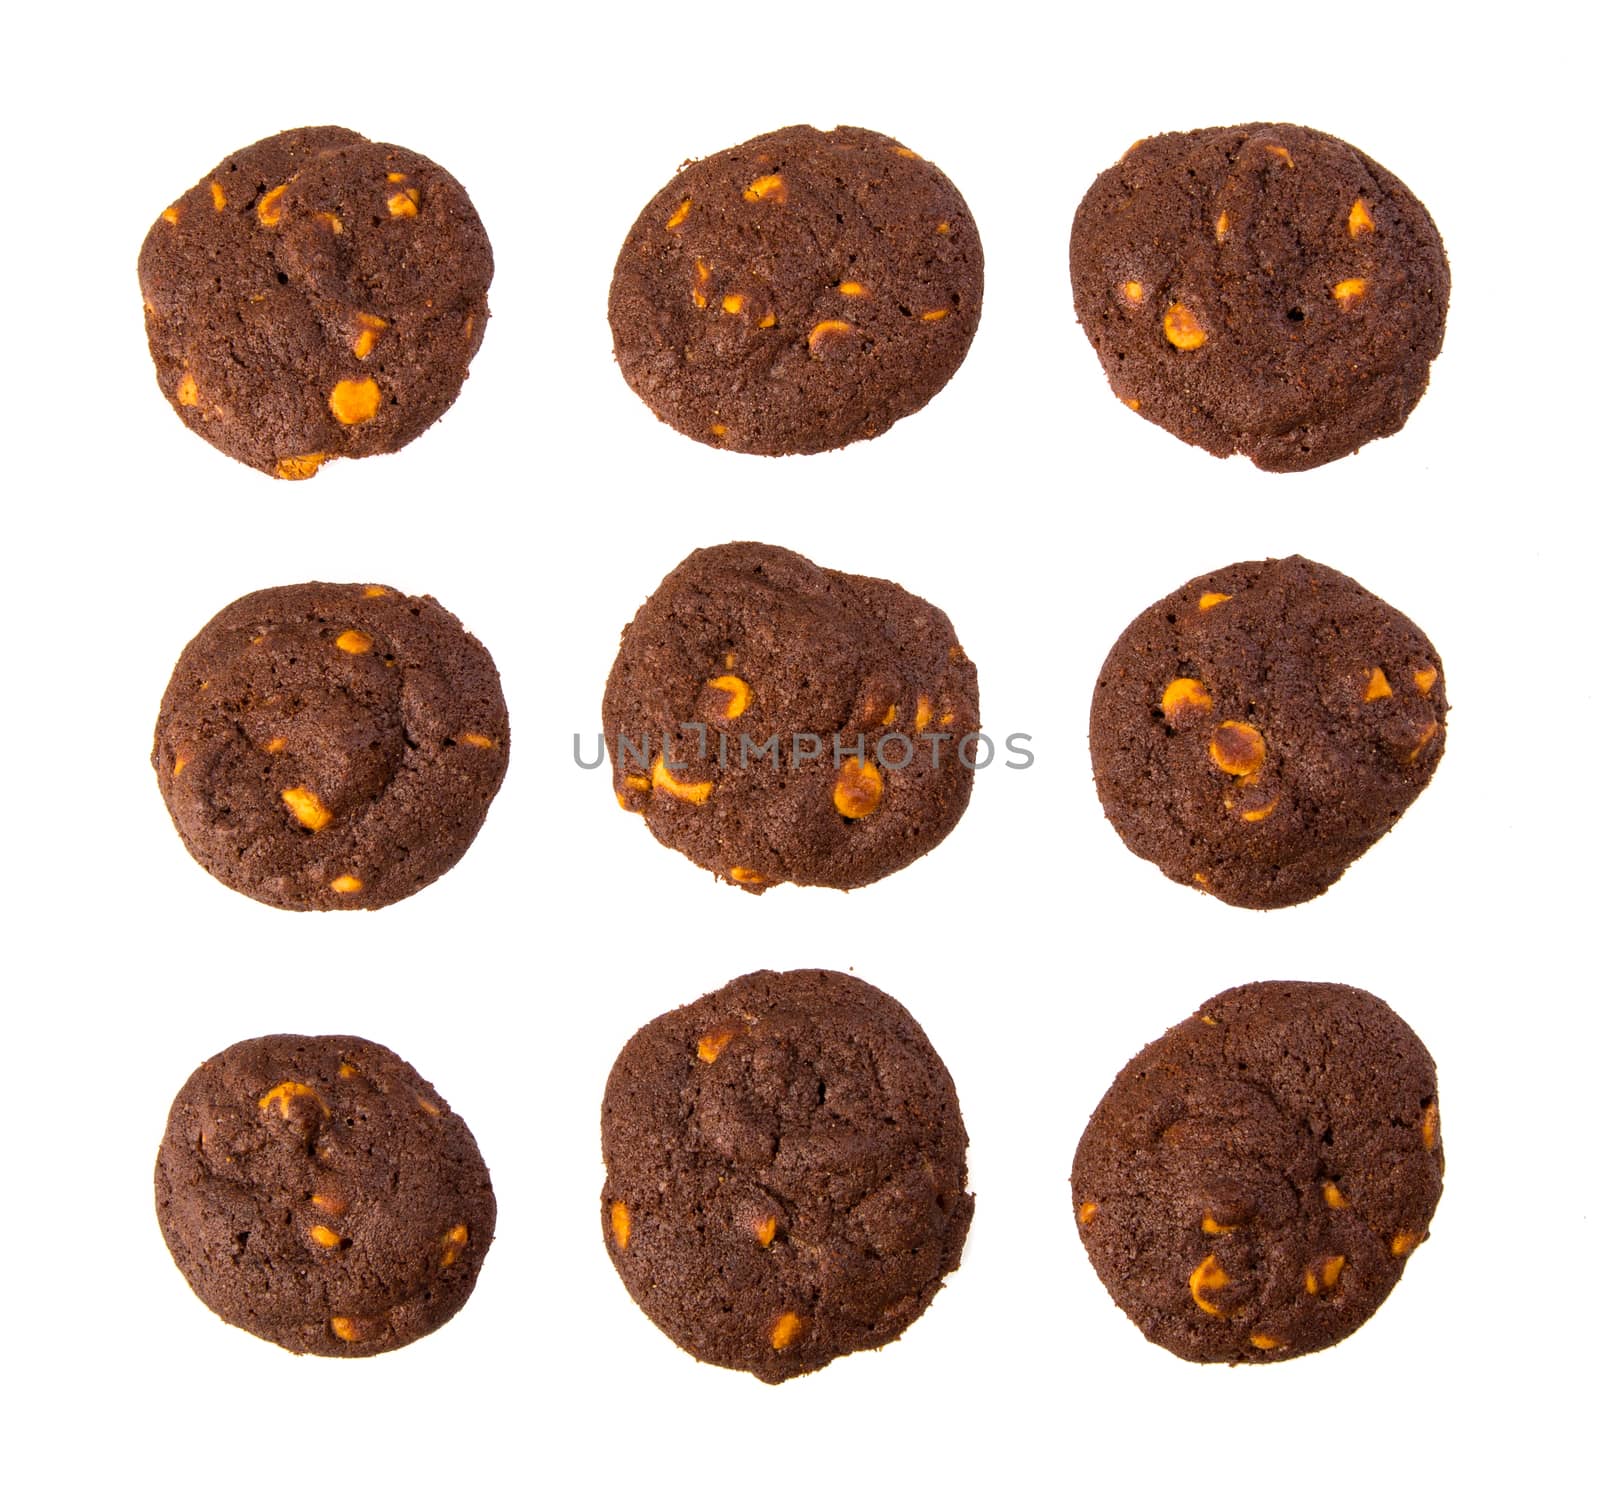 chocolate almond cookies isolated on white background